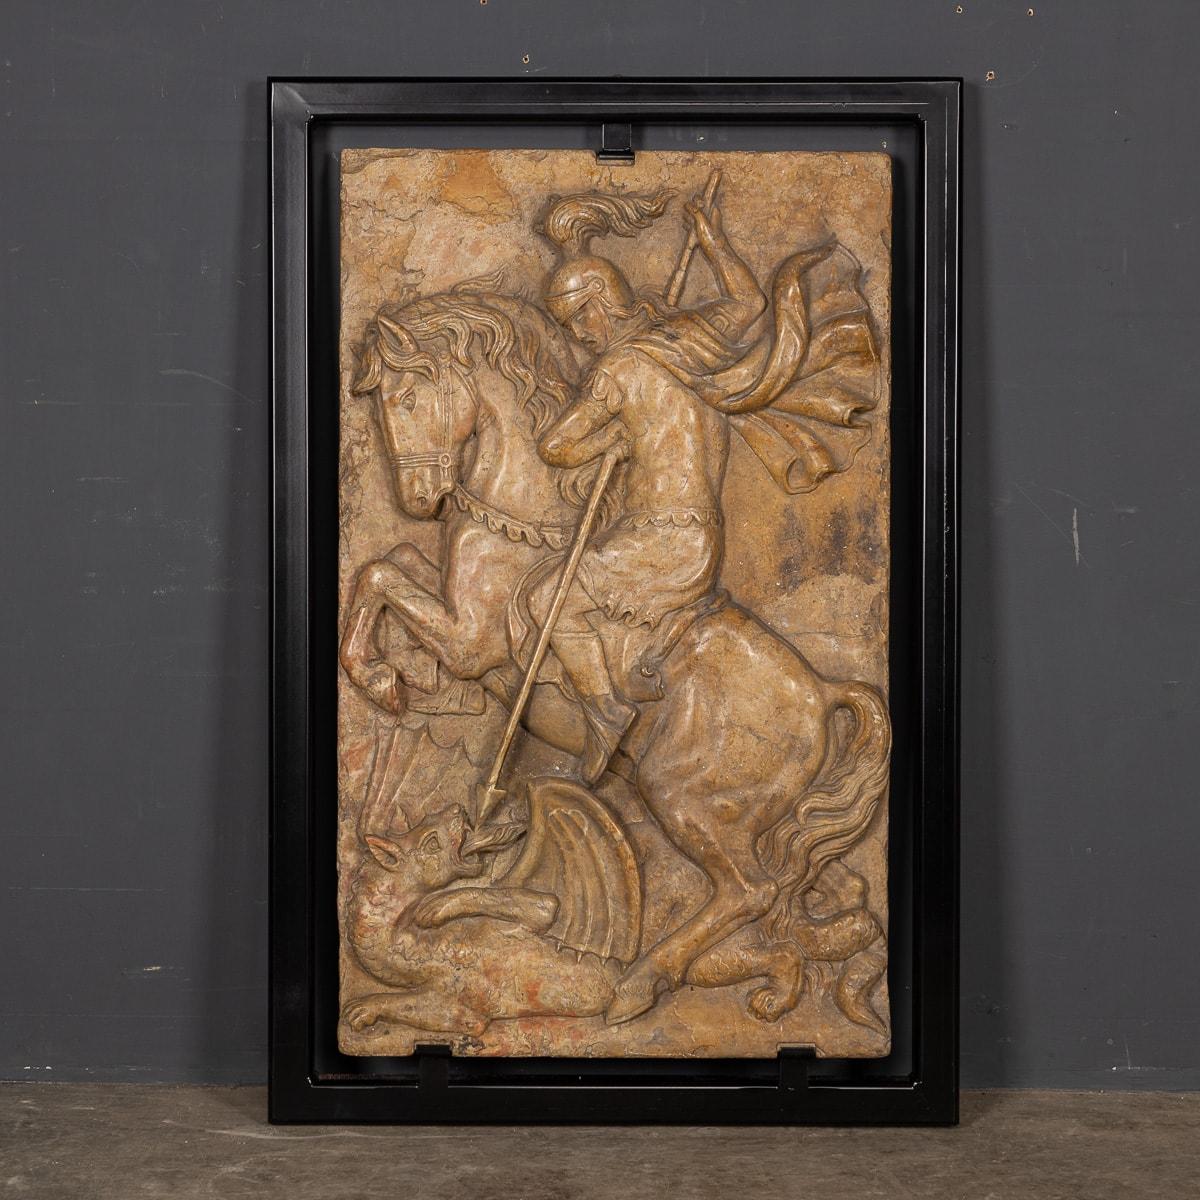 Antique 19th Century Italian Grand Tour marble relief depicting St George slaying the Dragon.

England has always been one of the leading countries in terms of travelling and exploring. It is in fact here that the tradition of the Grand Tour began